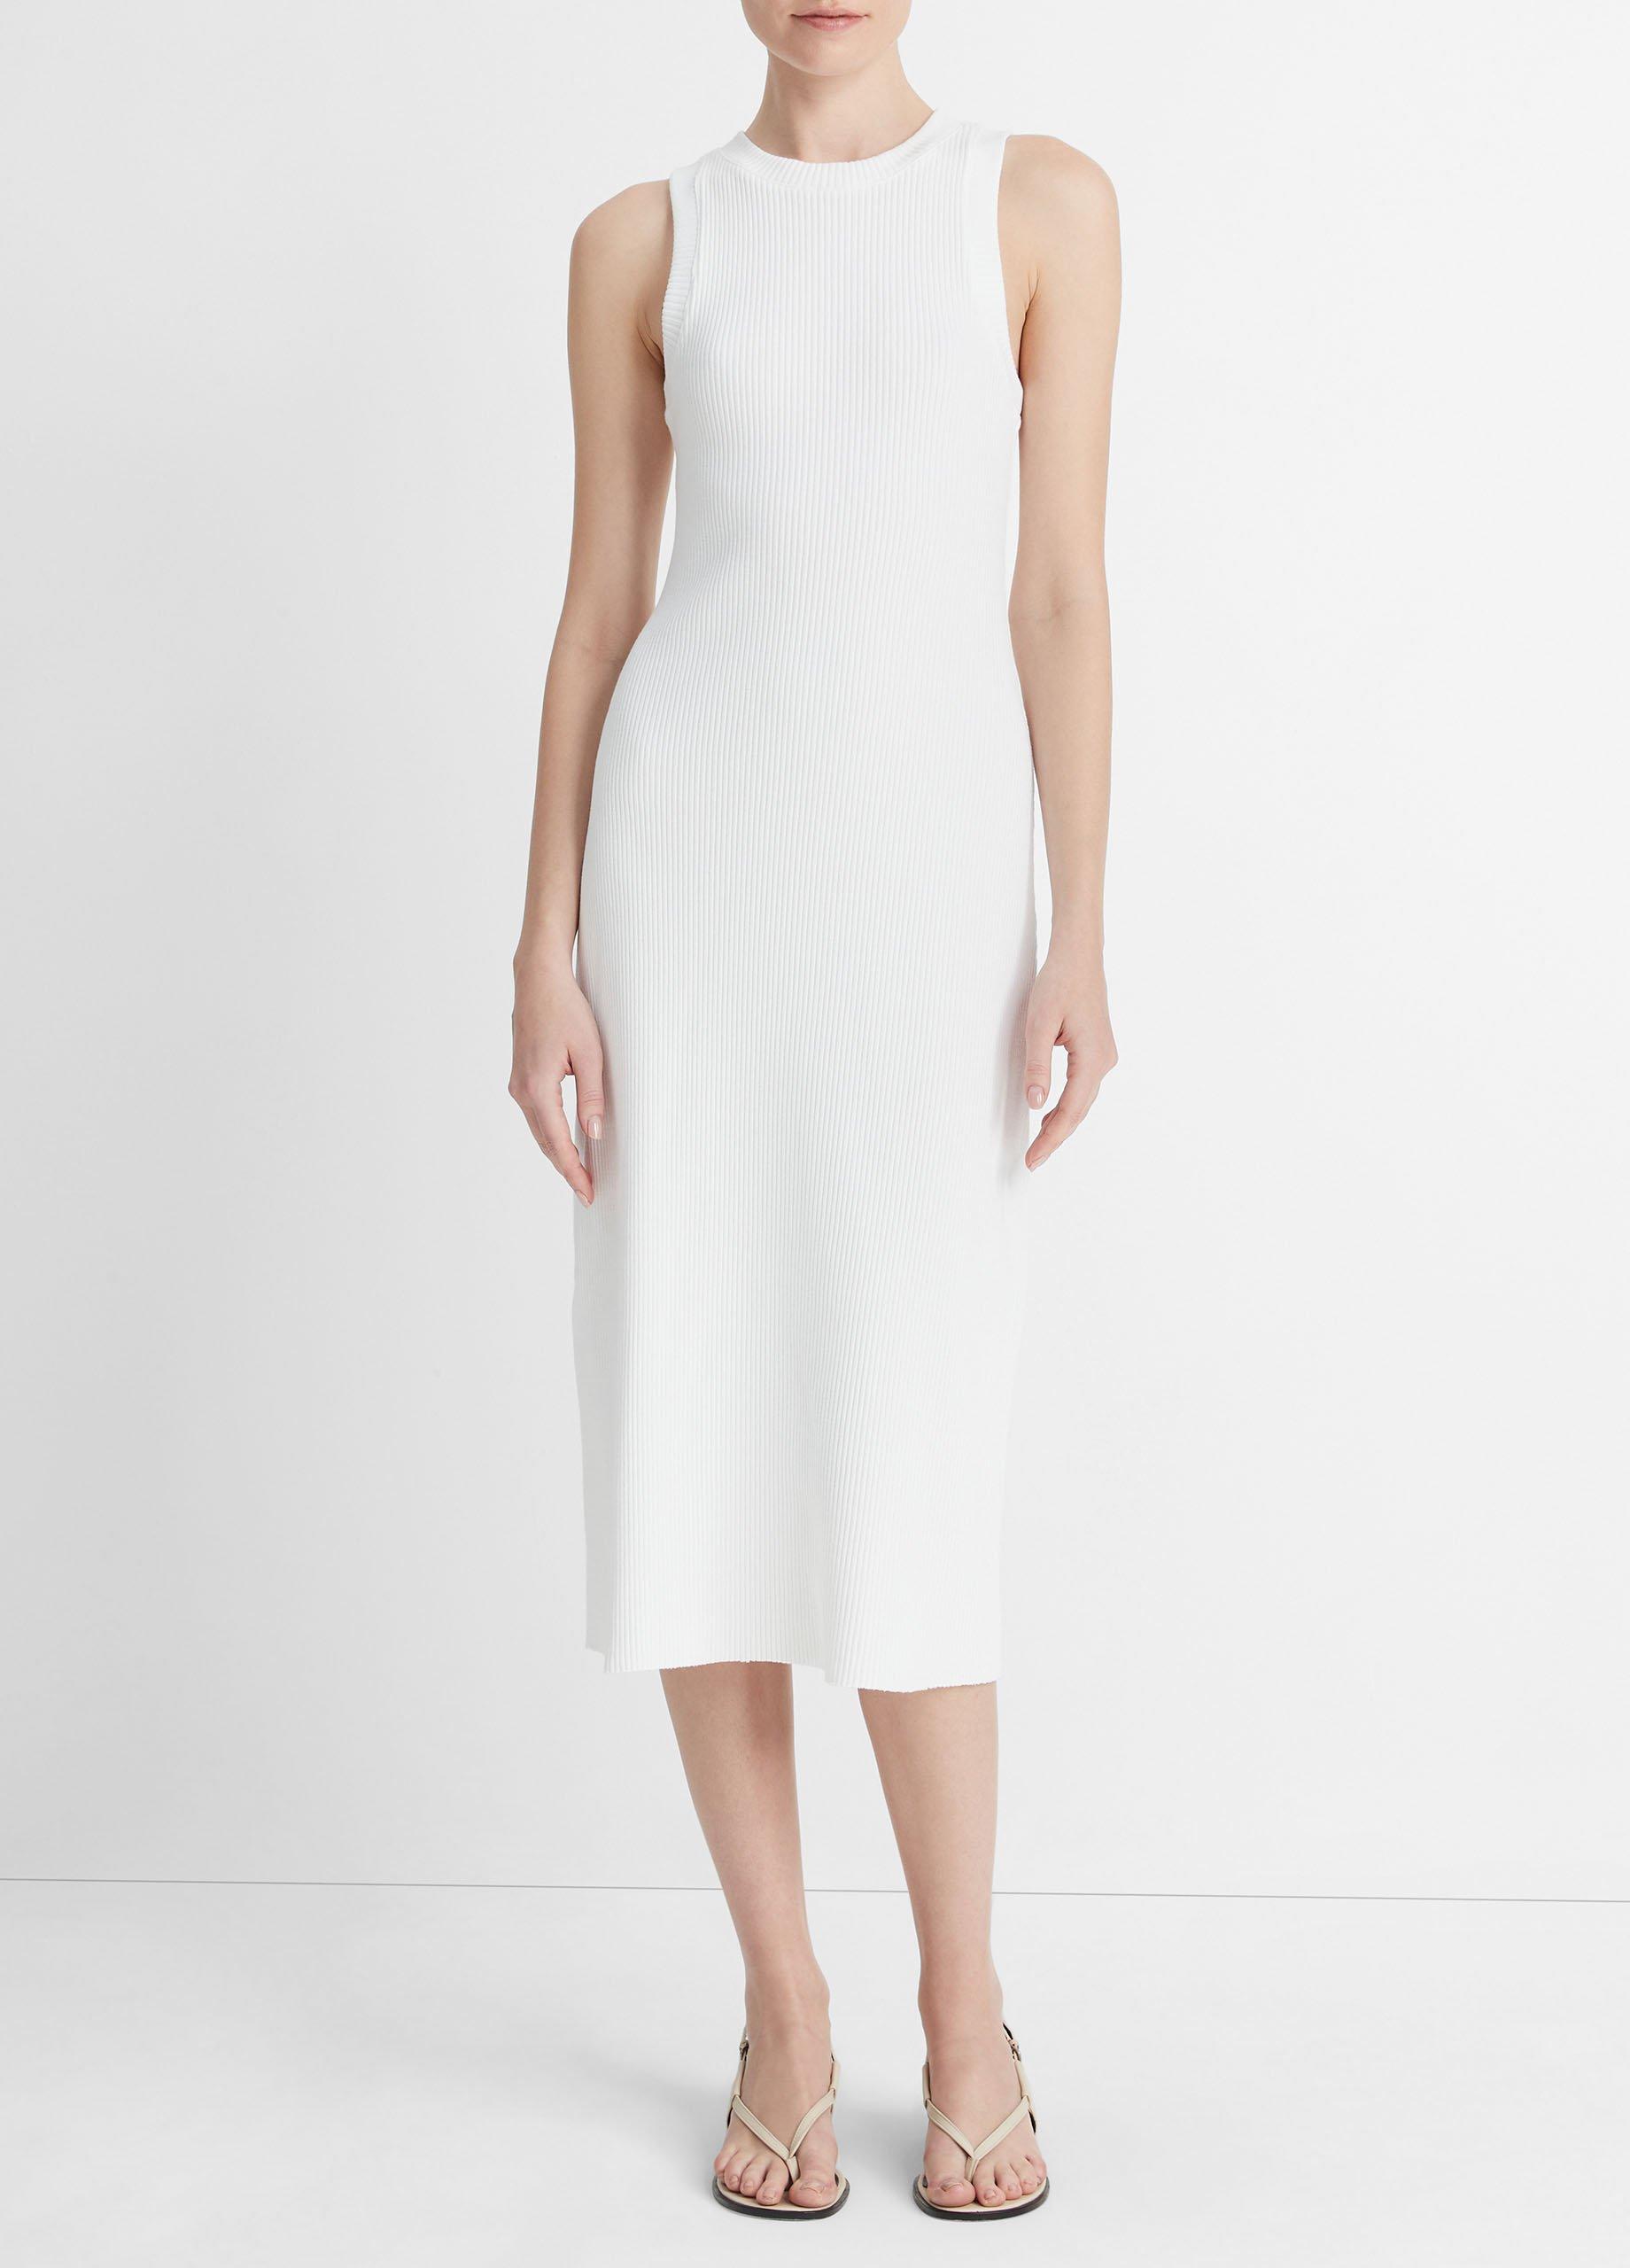 Buy Ribbed High-Neck Tank Dress for USD 245.00 | Vince